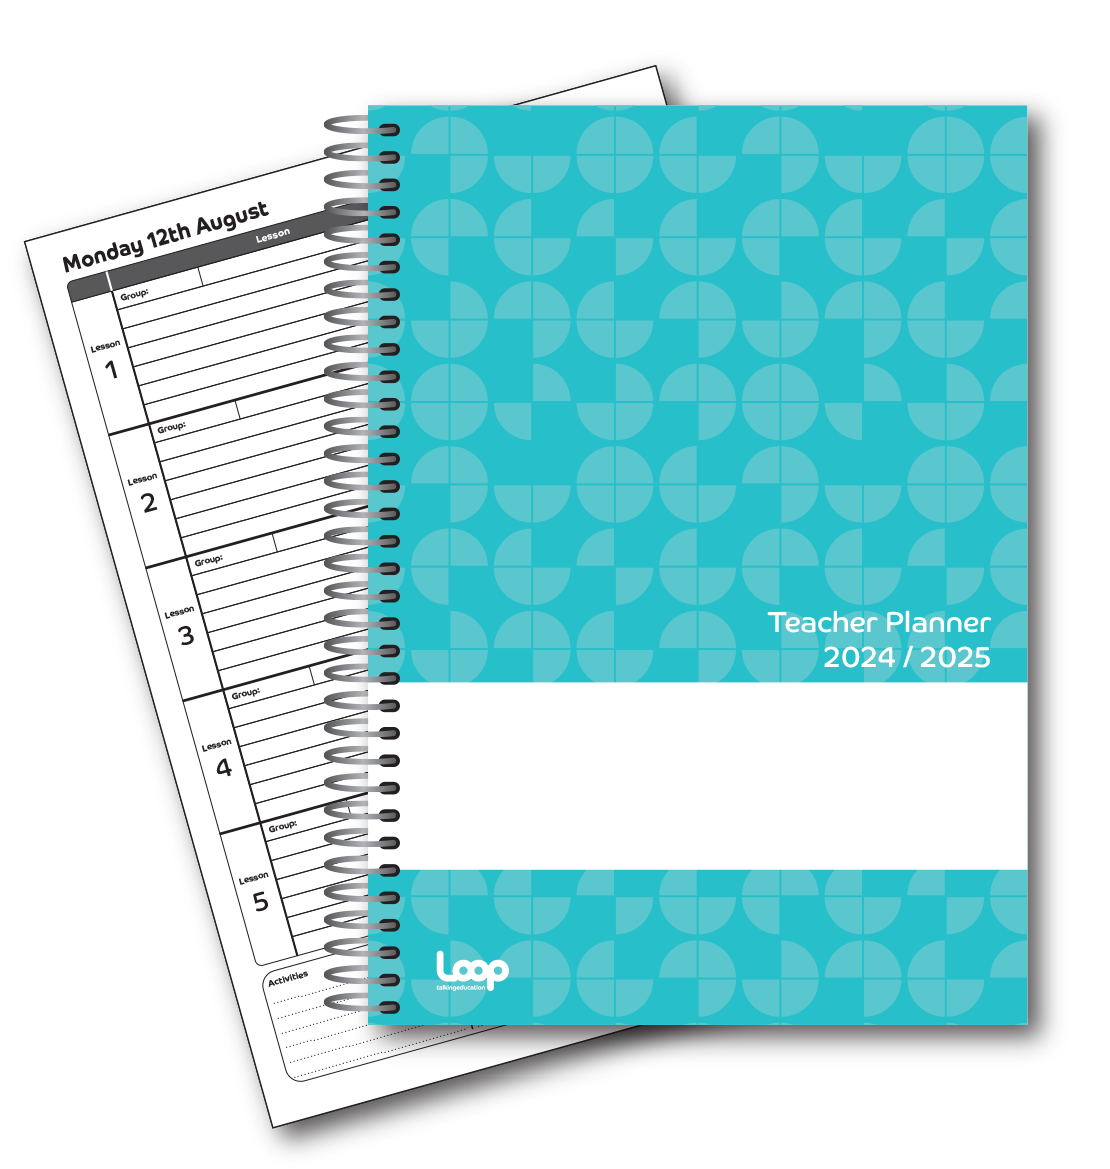 5 Lesson Dated Teacher Planner B5 size